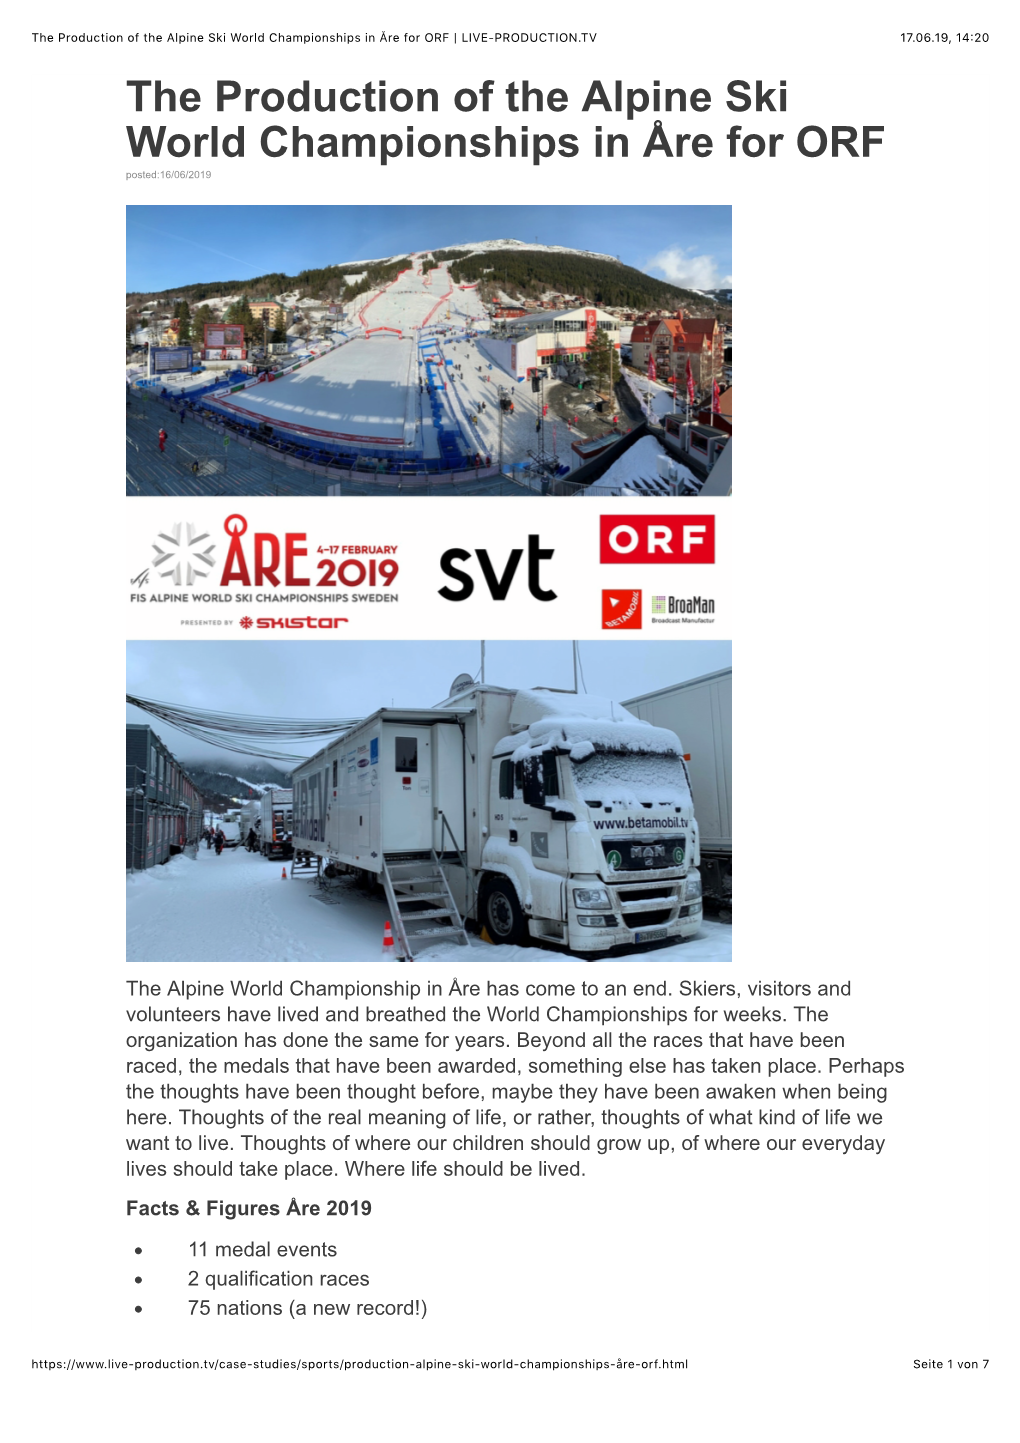 The Production of the Alpine Ski World Championships in Åre for ORF